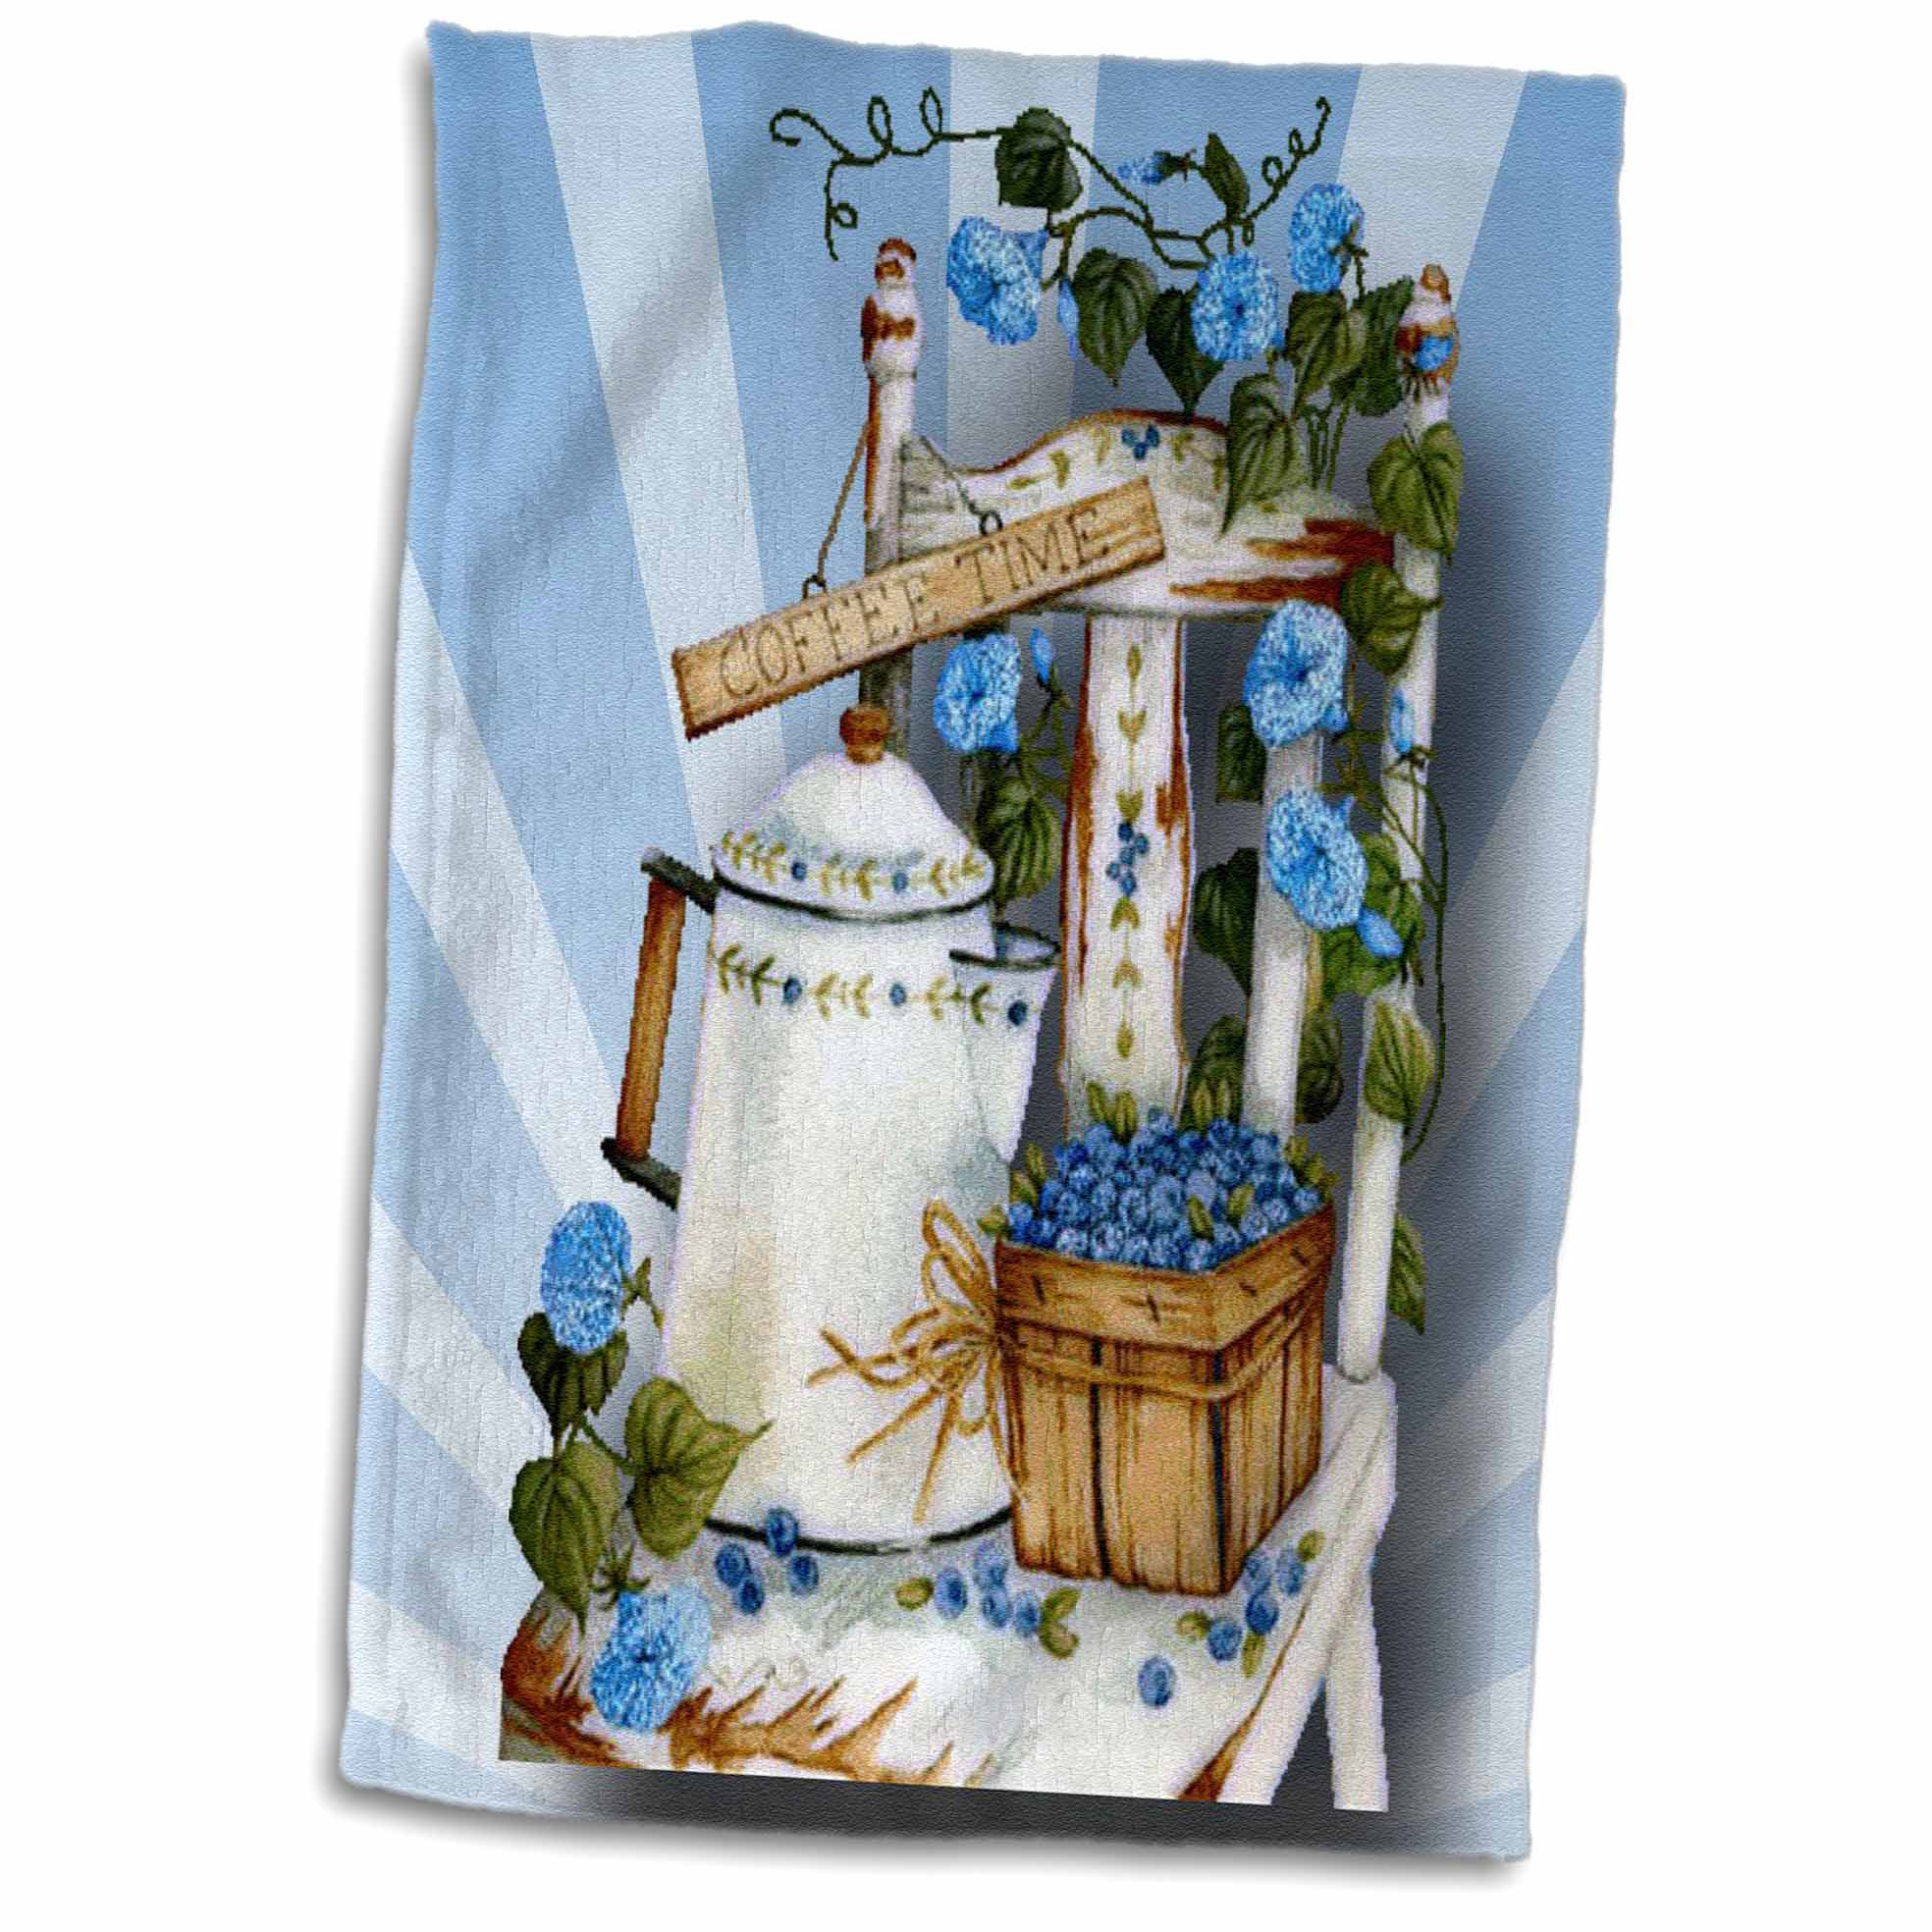 3dRose Garden chair and with pretty blue flowers and tea pot, and basket of blueberries - Towel, 15 by 22-inch - image 1 of 1